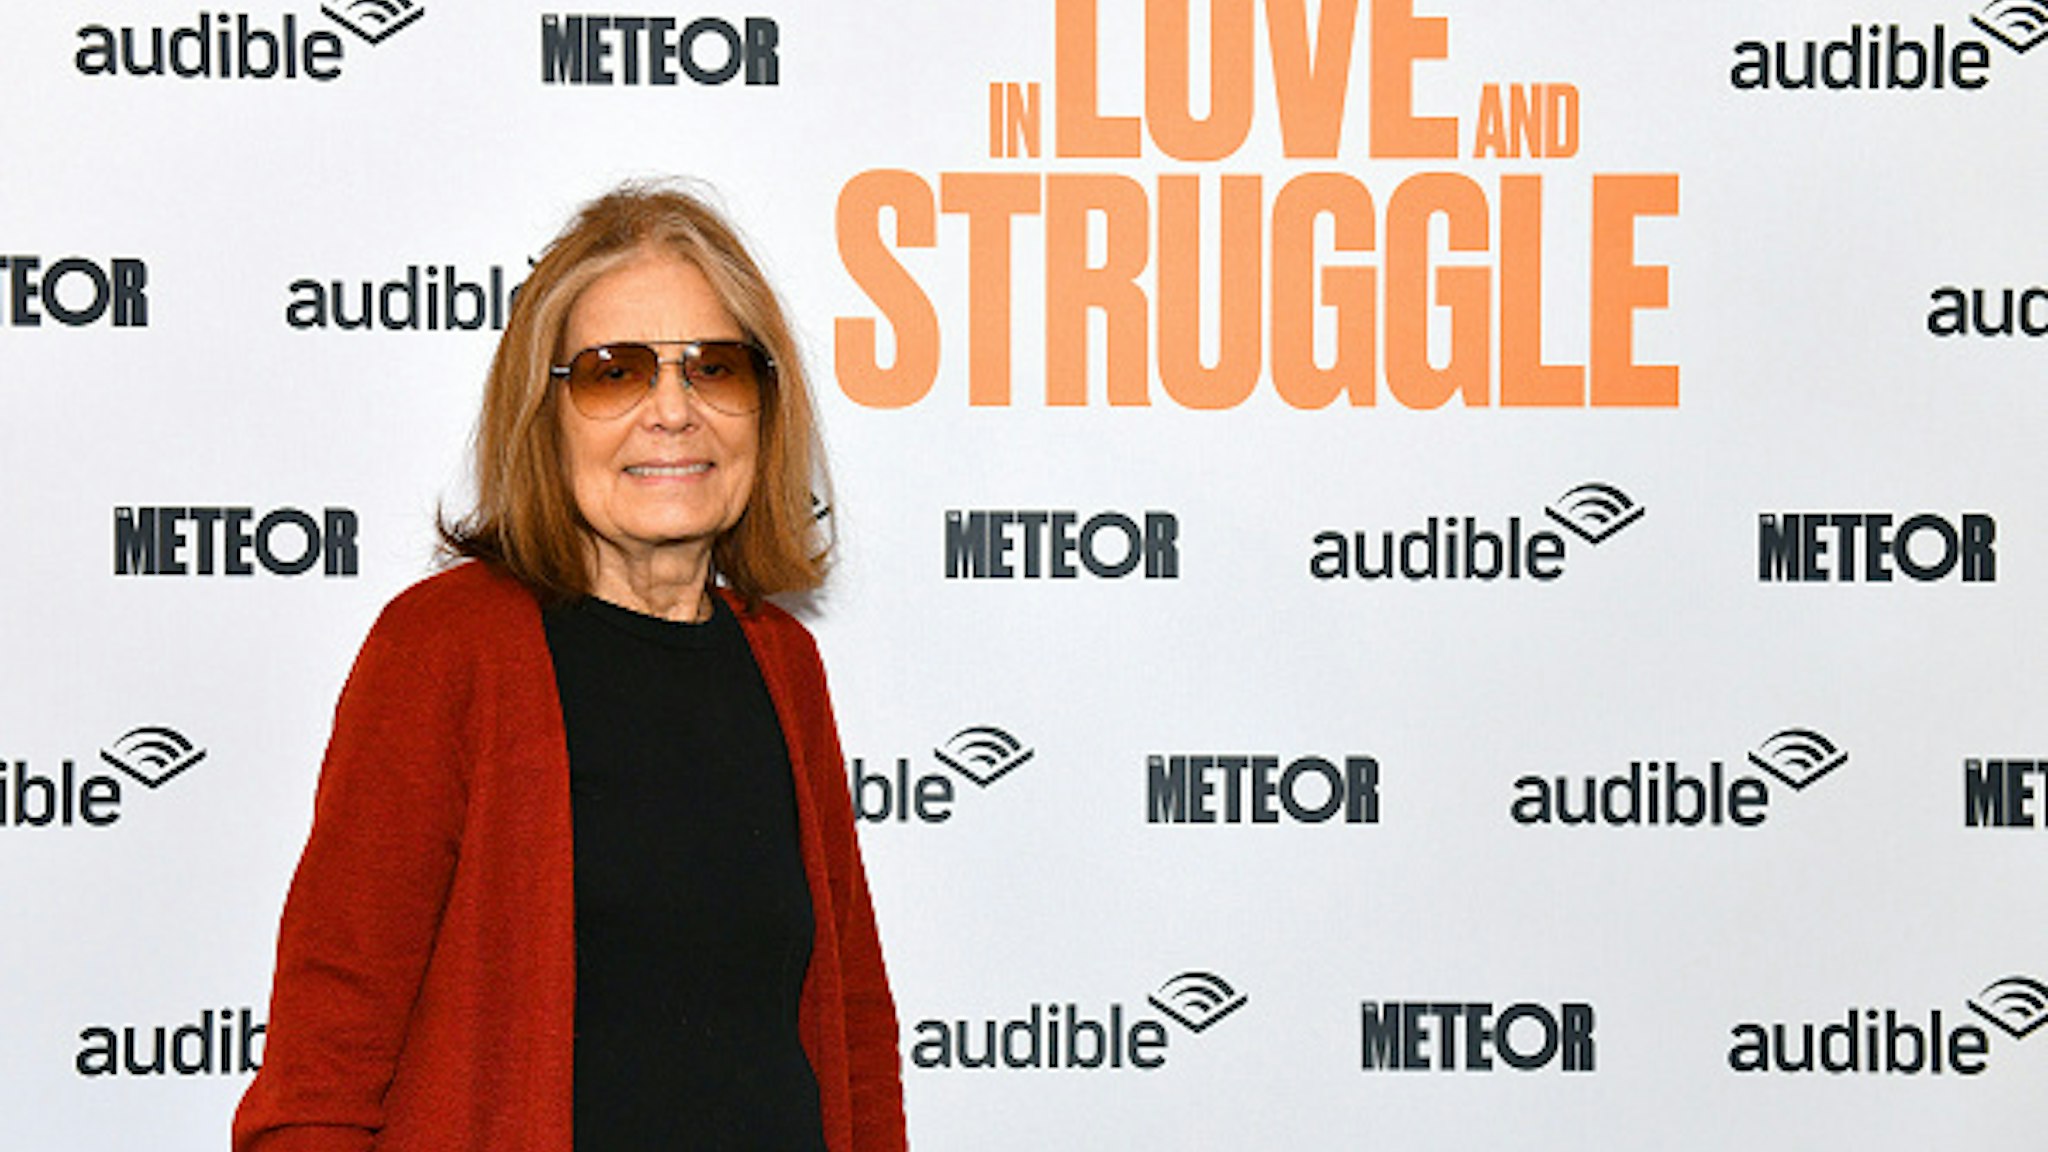 NEW YORK, NEW YORK - MARCH 01: Gloria Steinem attends as Audible presents: "In Love and Struggle" at Audible's Minetta Lane Theater on March 01, 2020 in New York City.